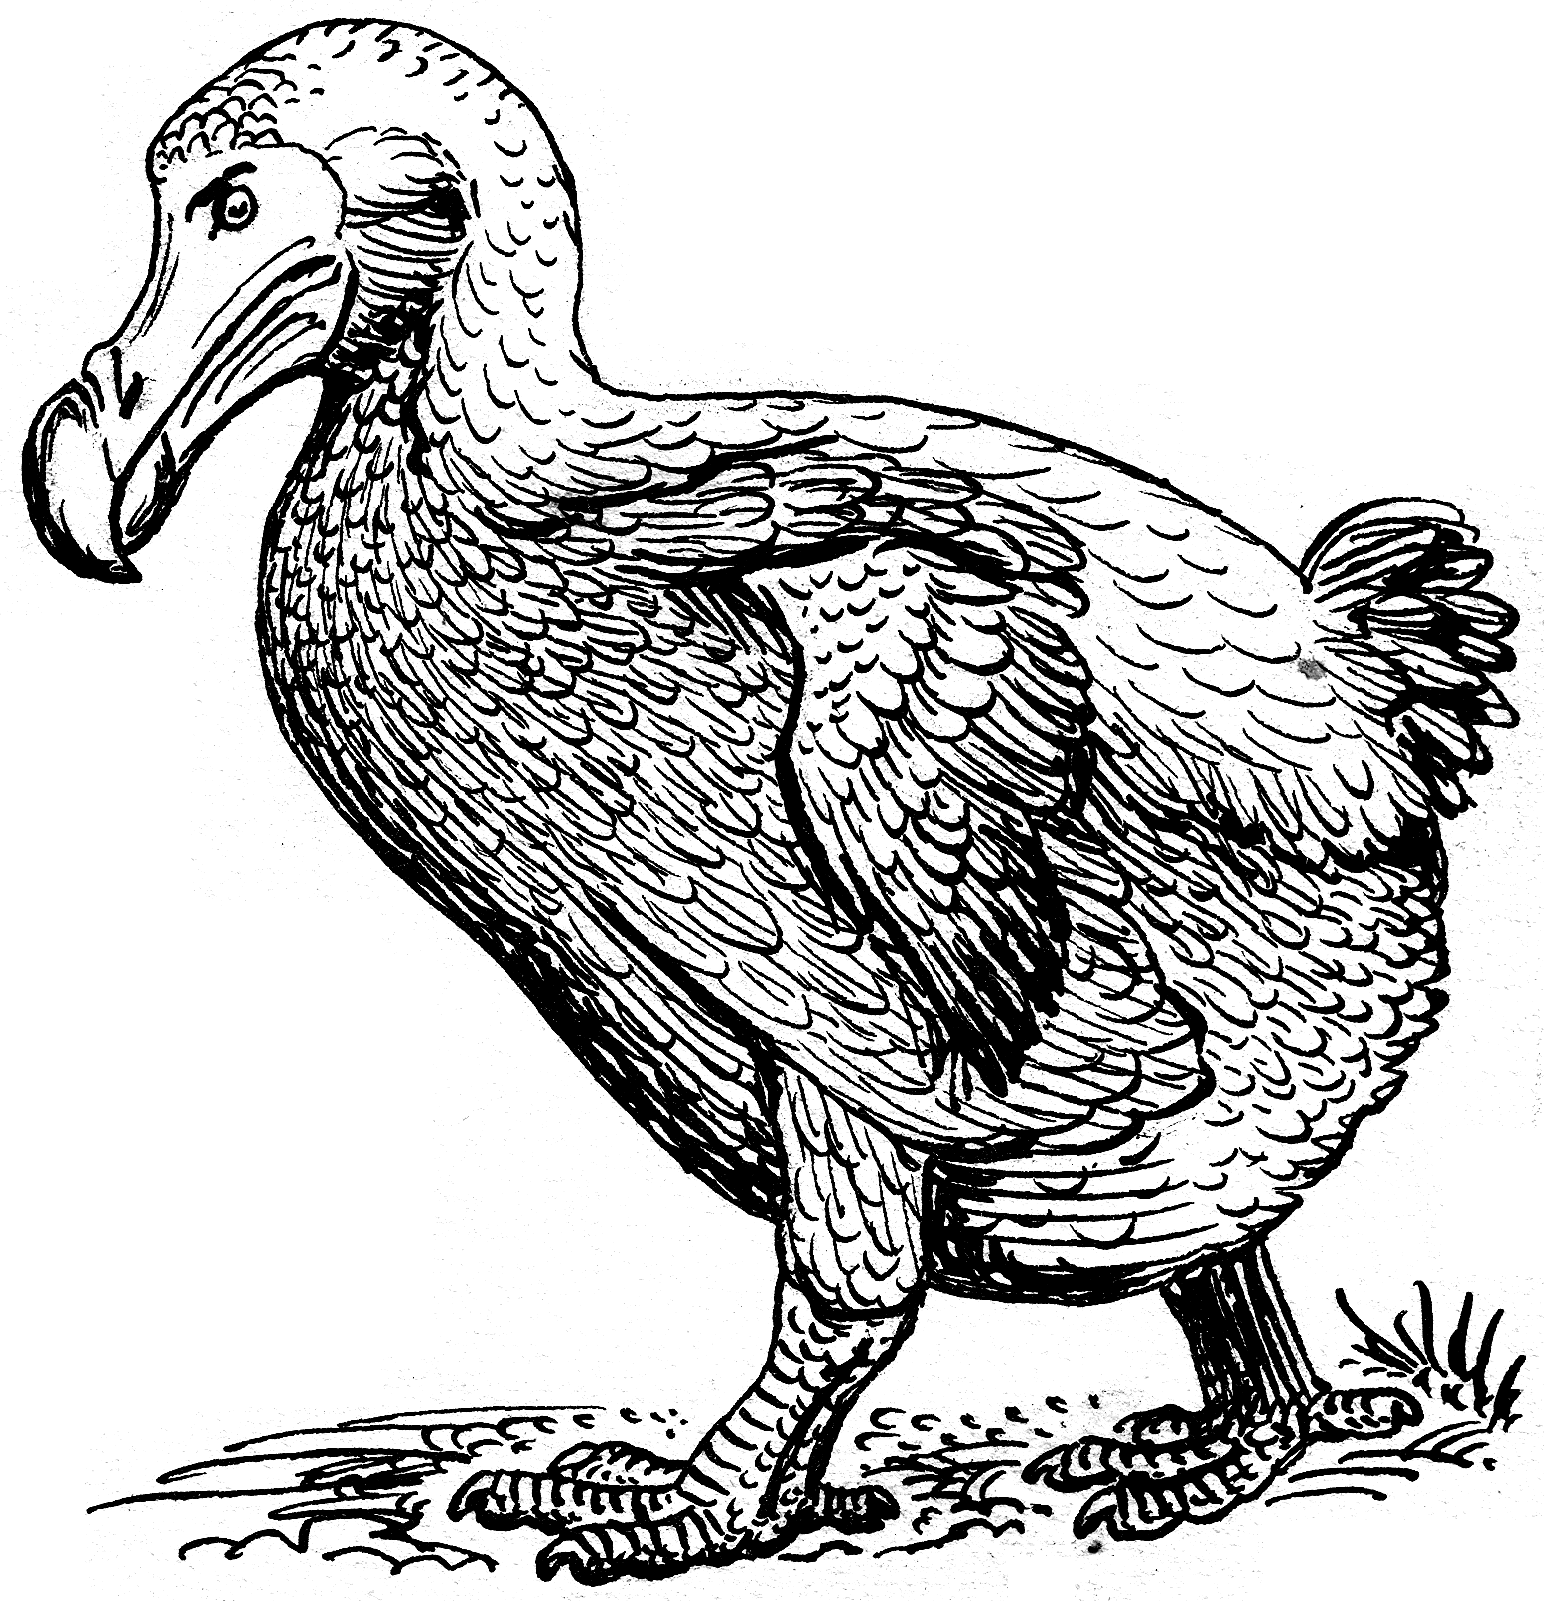 Dodo Bird Drawing at GetDrawings.com | Free for personal use Dodo ...